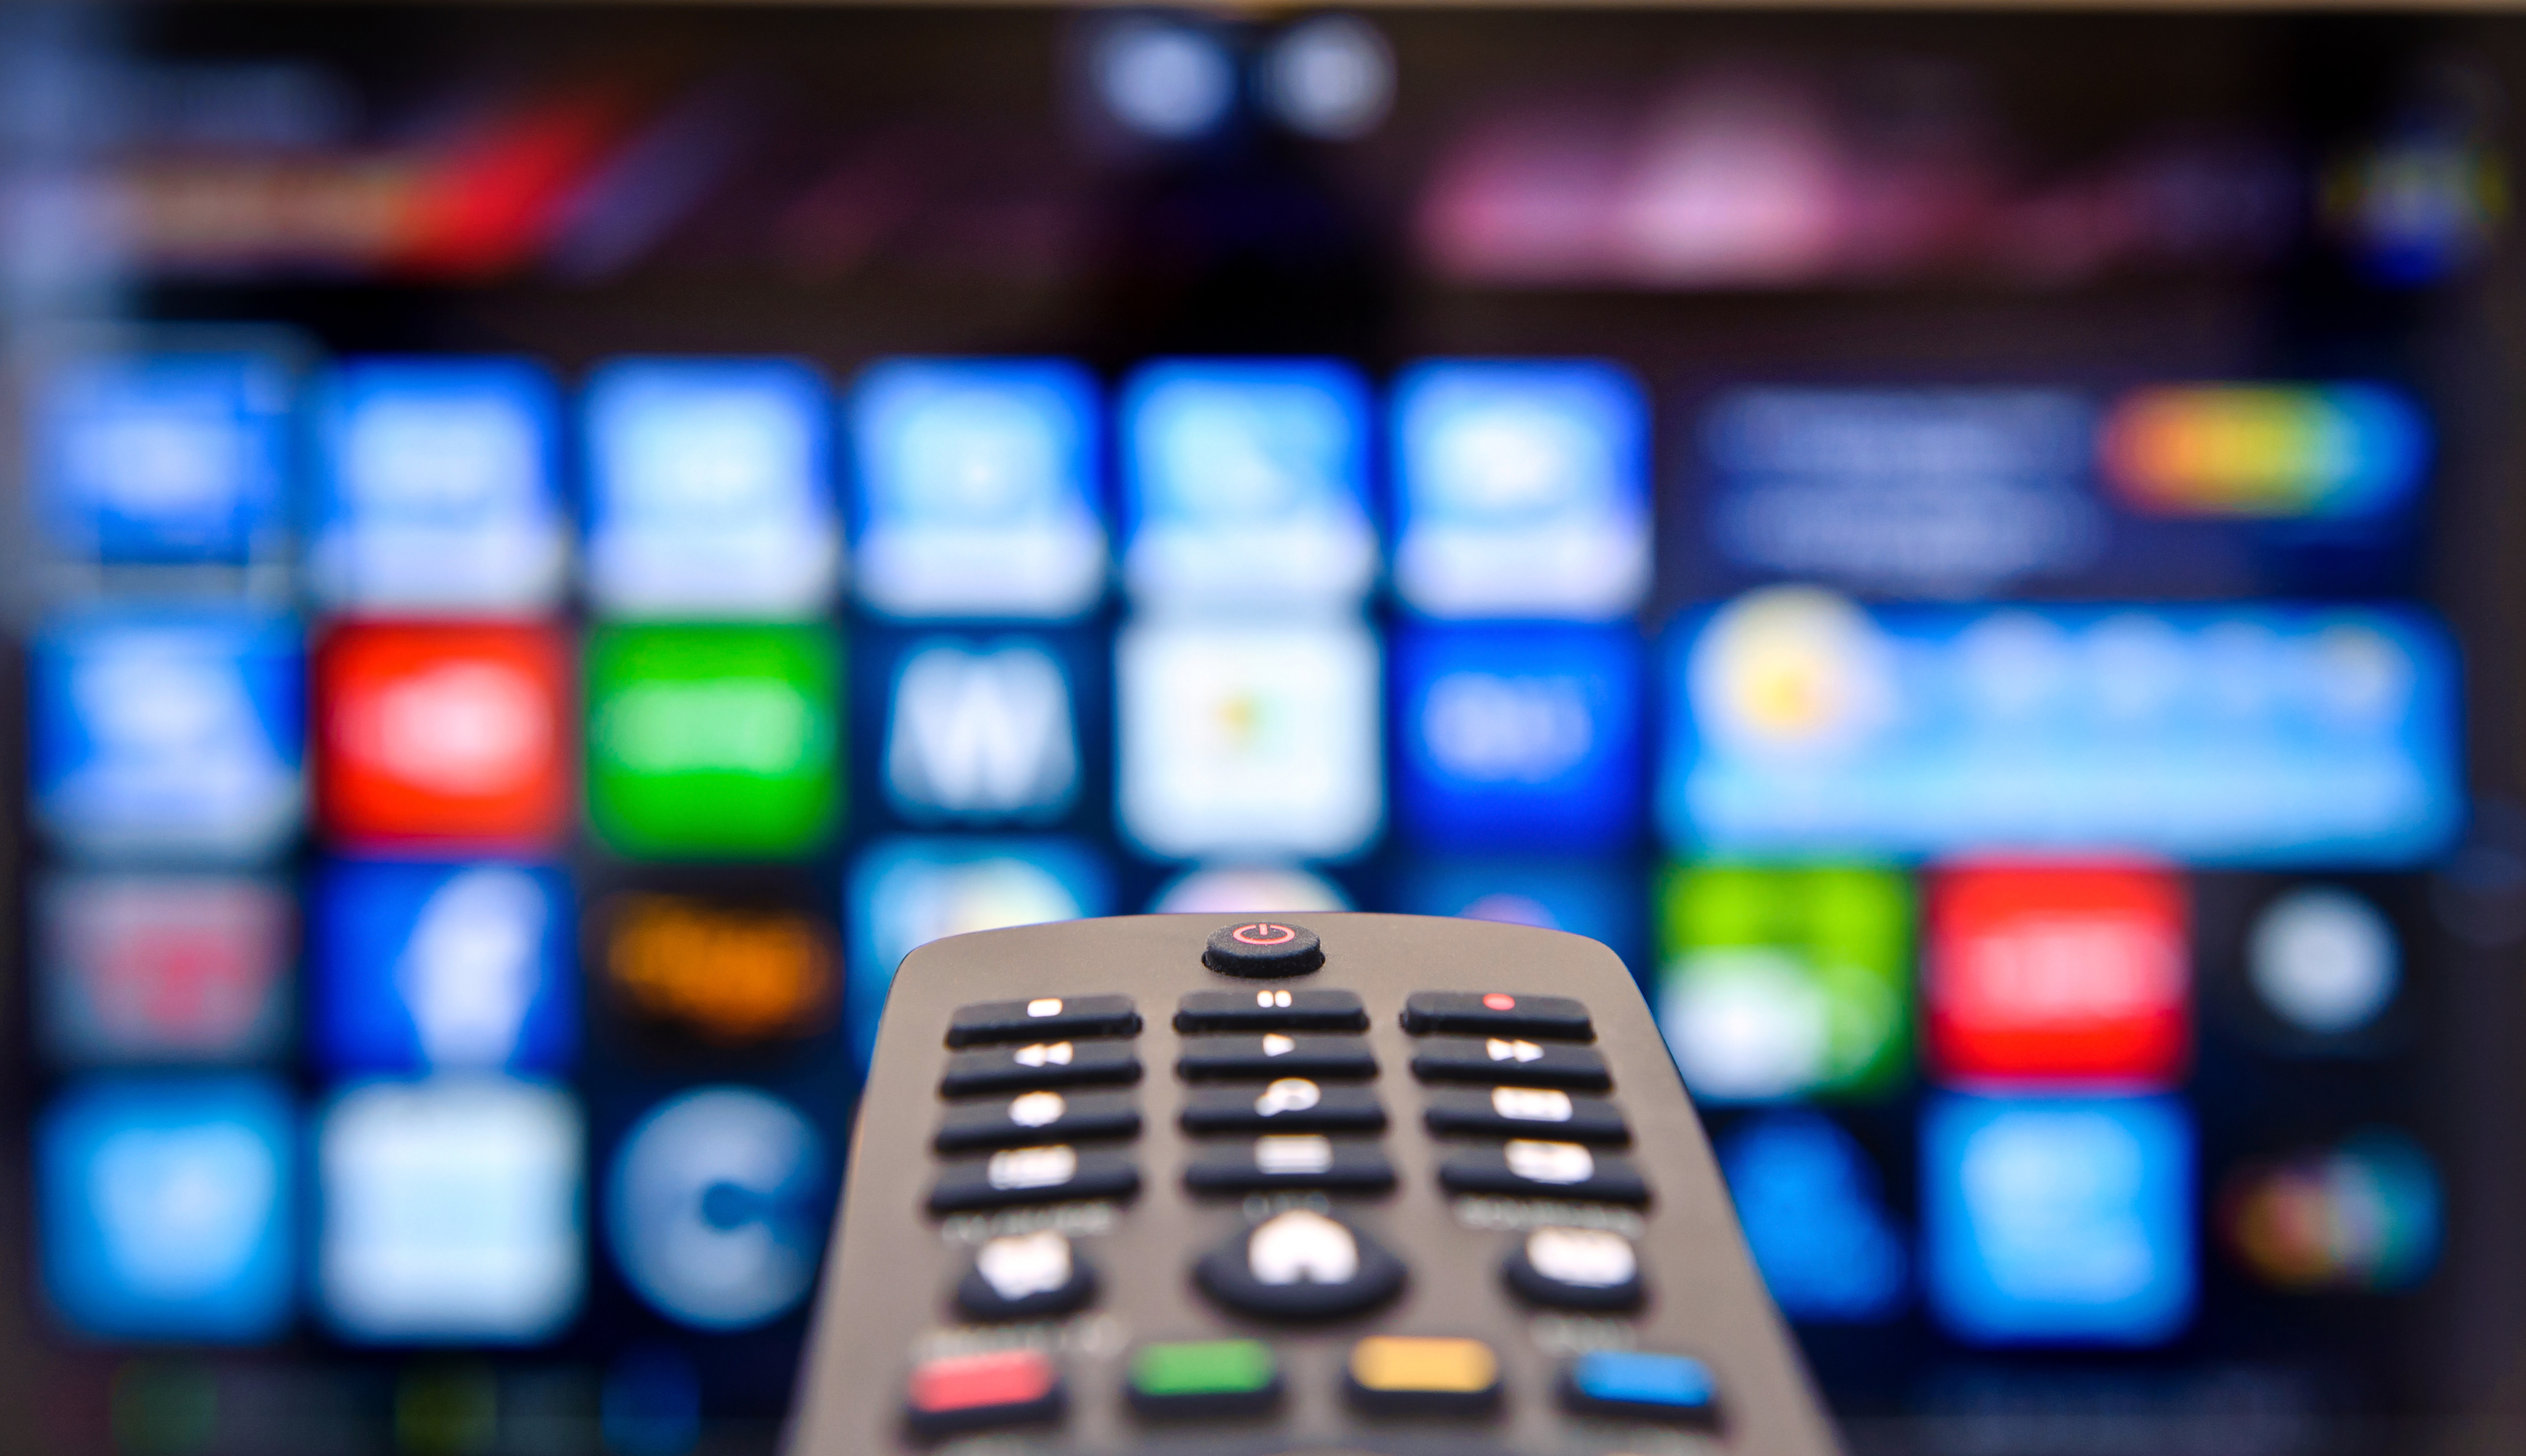 Remote control pointing at Smart TV with apps